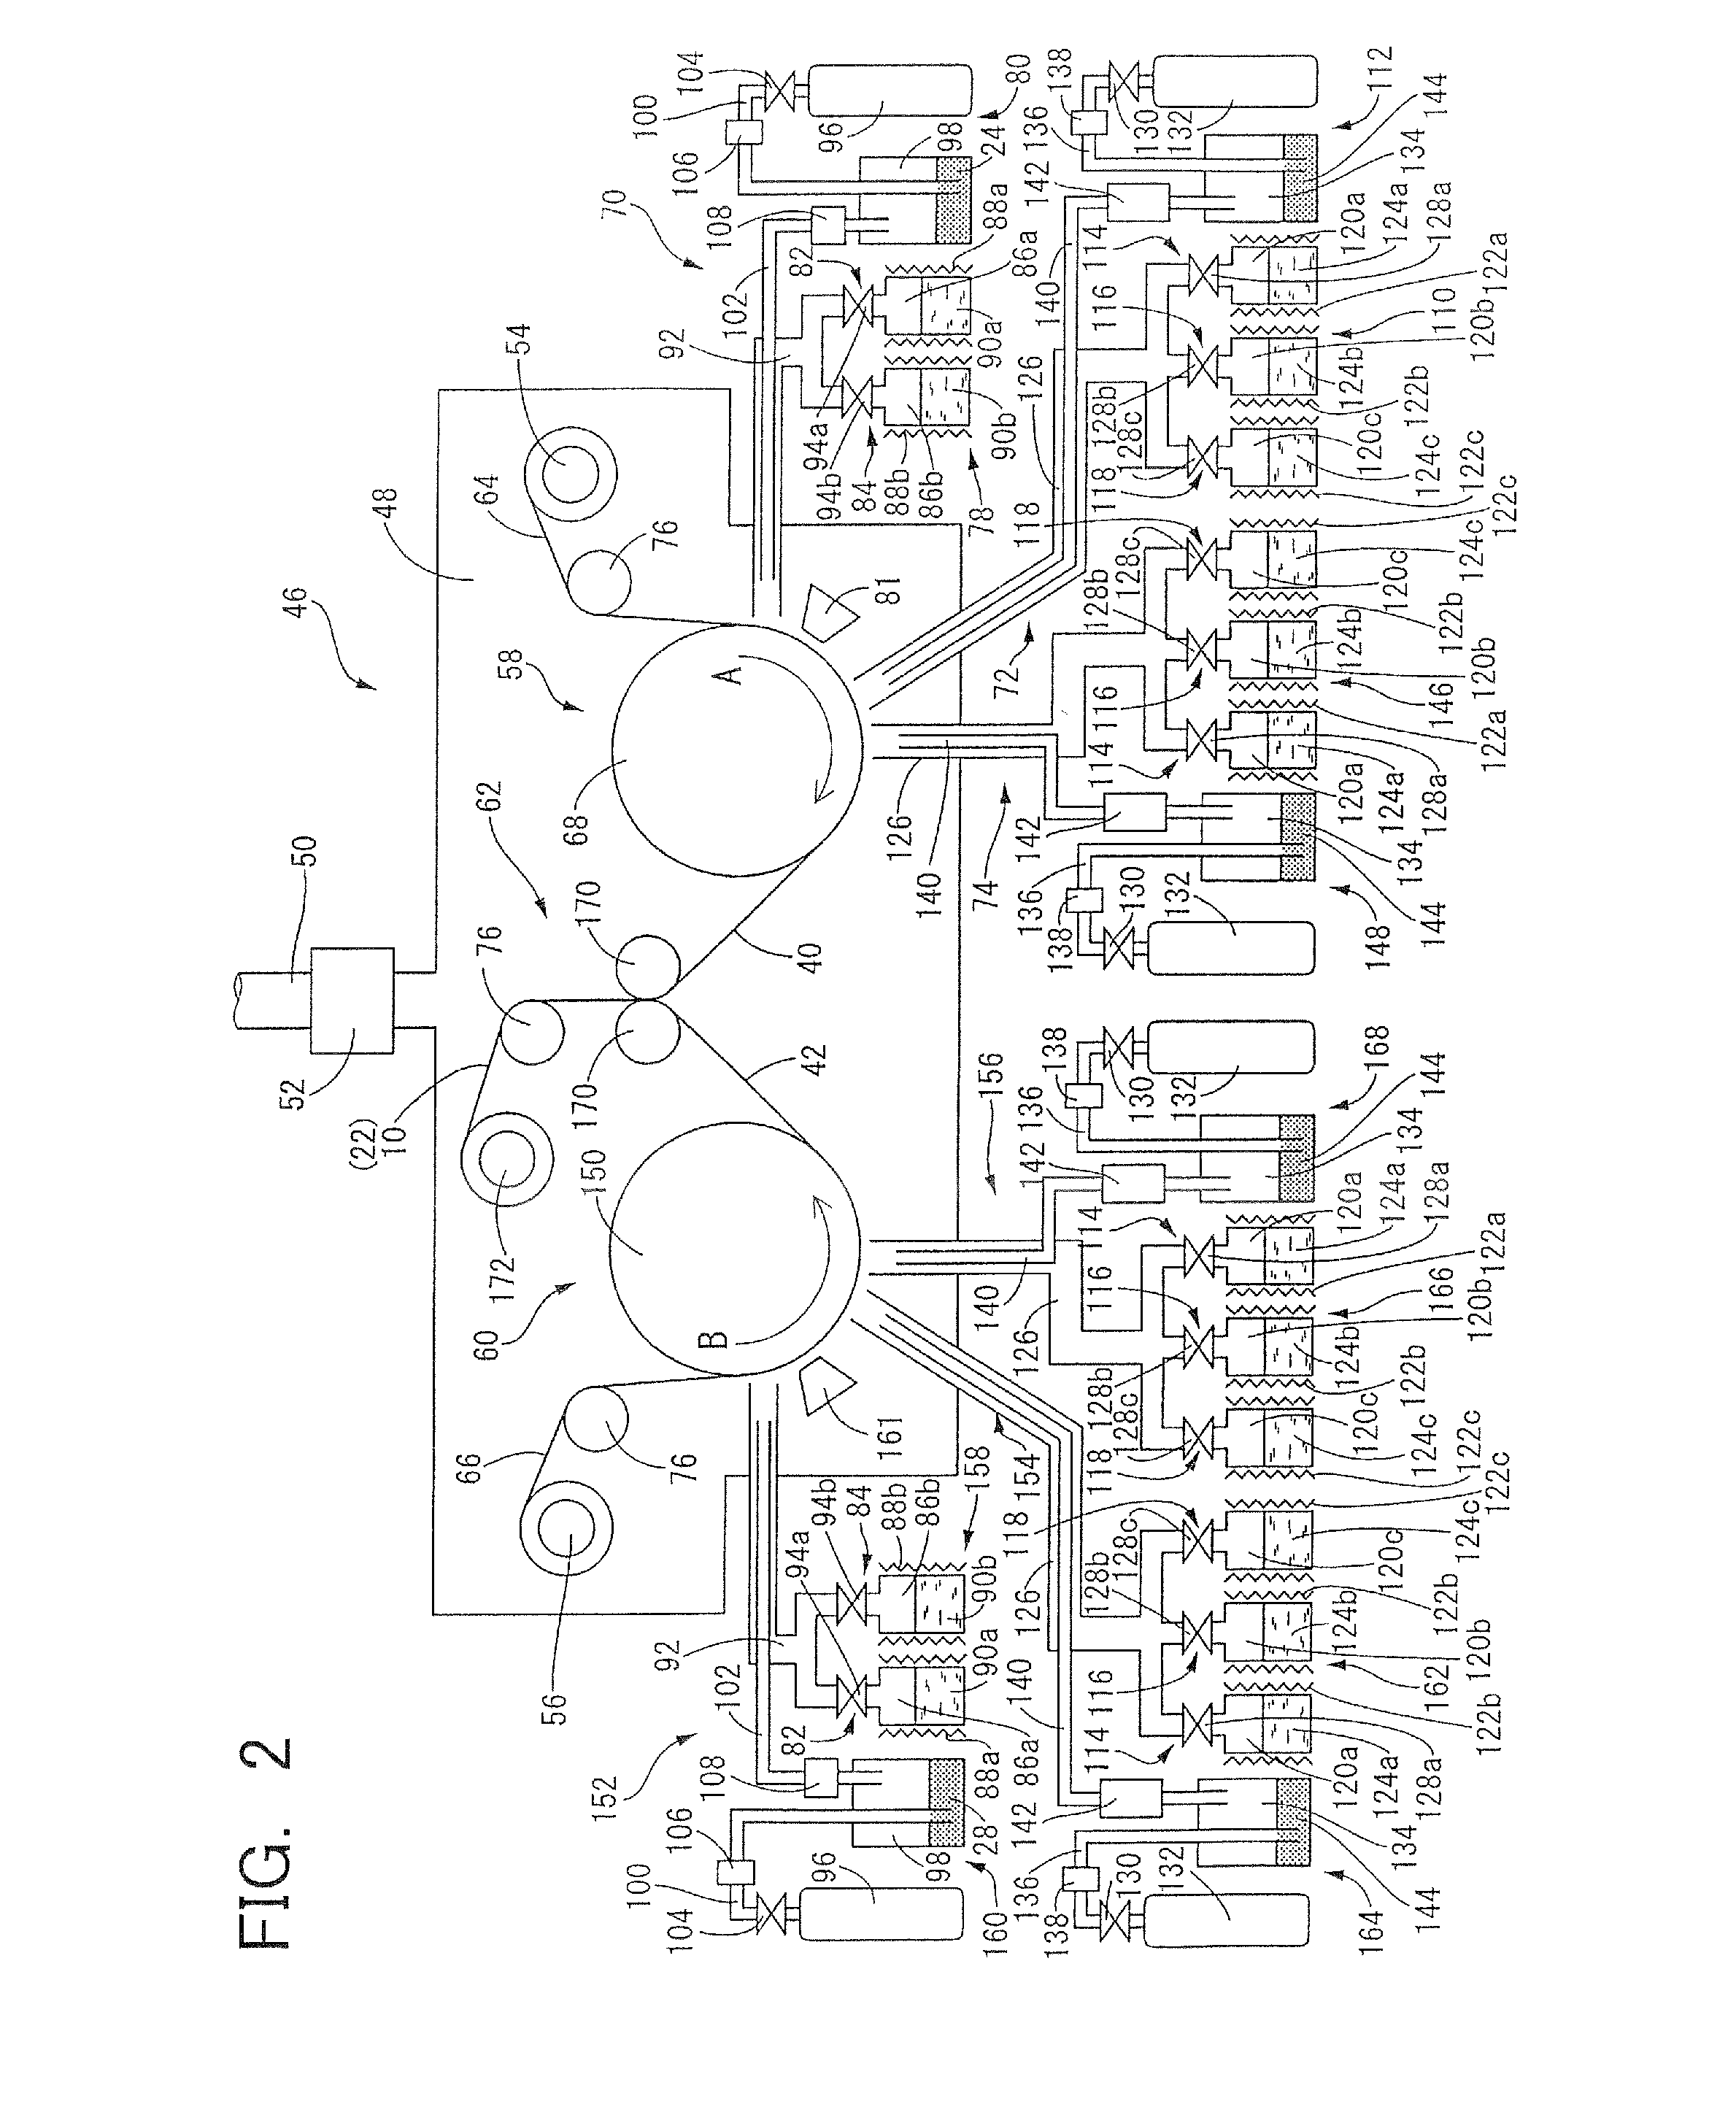 Lithium-ion secondary battery, and method of and apparatus for producing the same